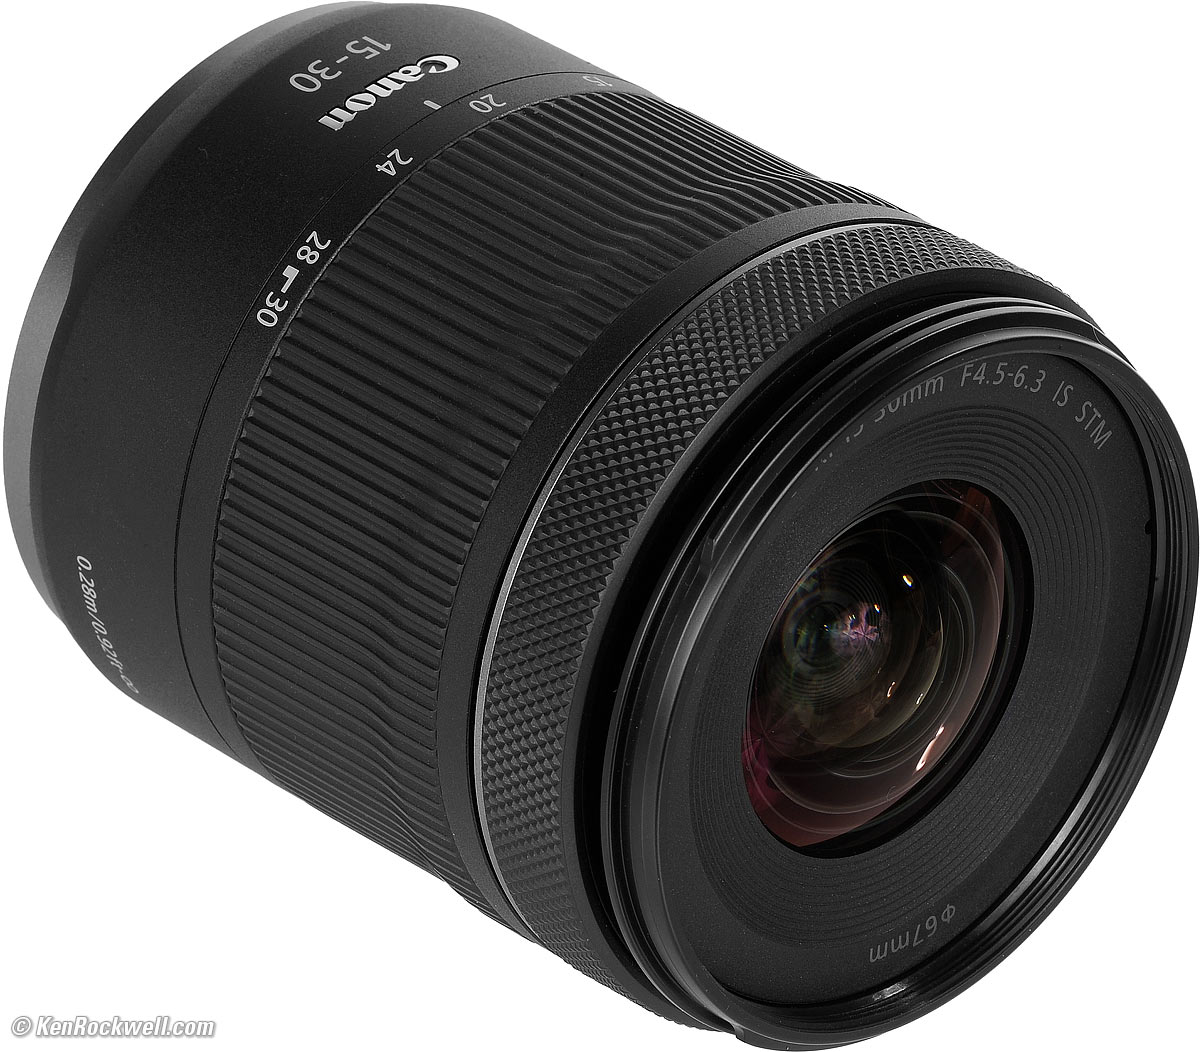 Canon RF 15-30mm IS STM Review & Sample Images by Ken Rockwell